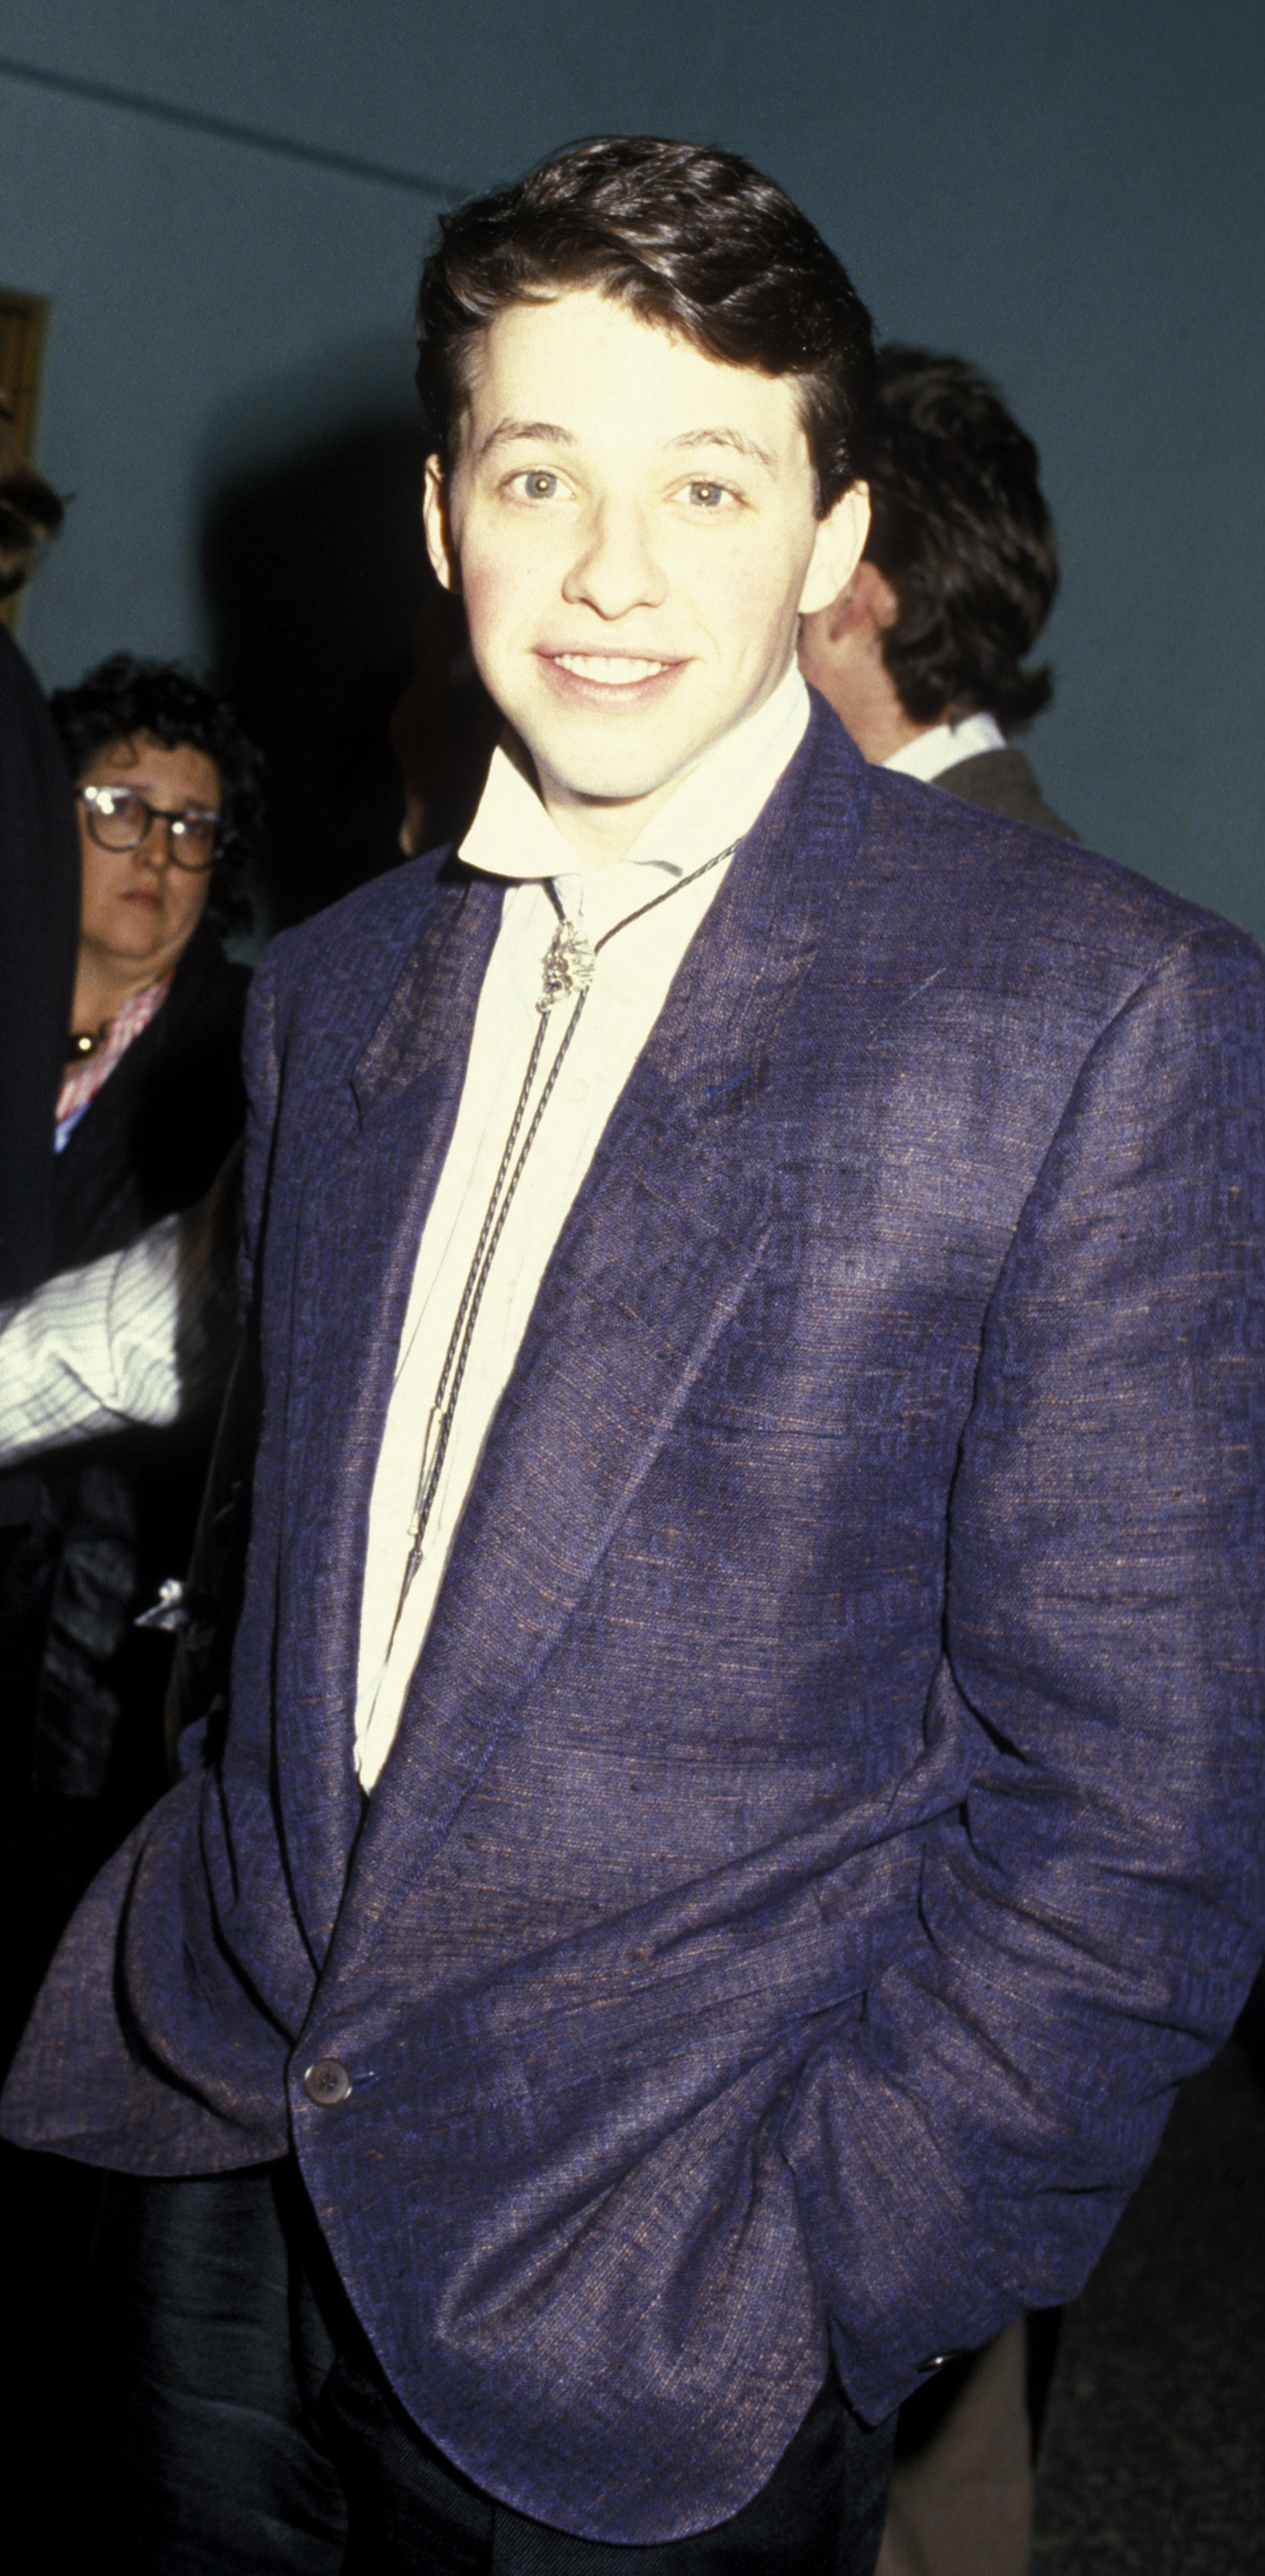 Jon Cryer attends the "Pretty in Pink" premiere on January 29, 1986 | Source: Getty Images